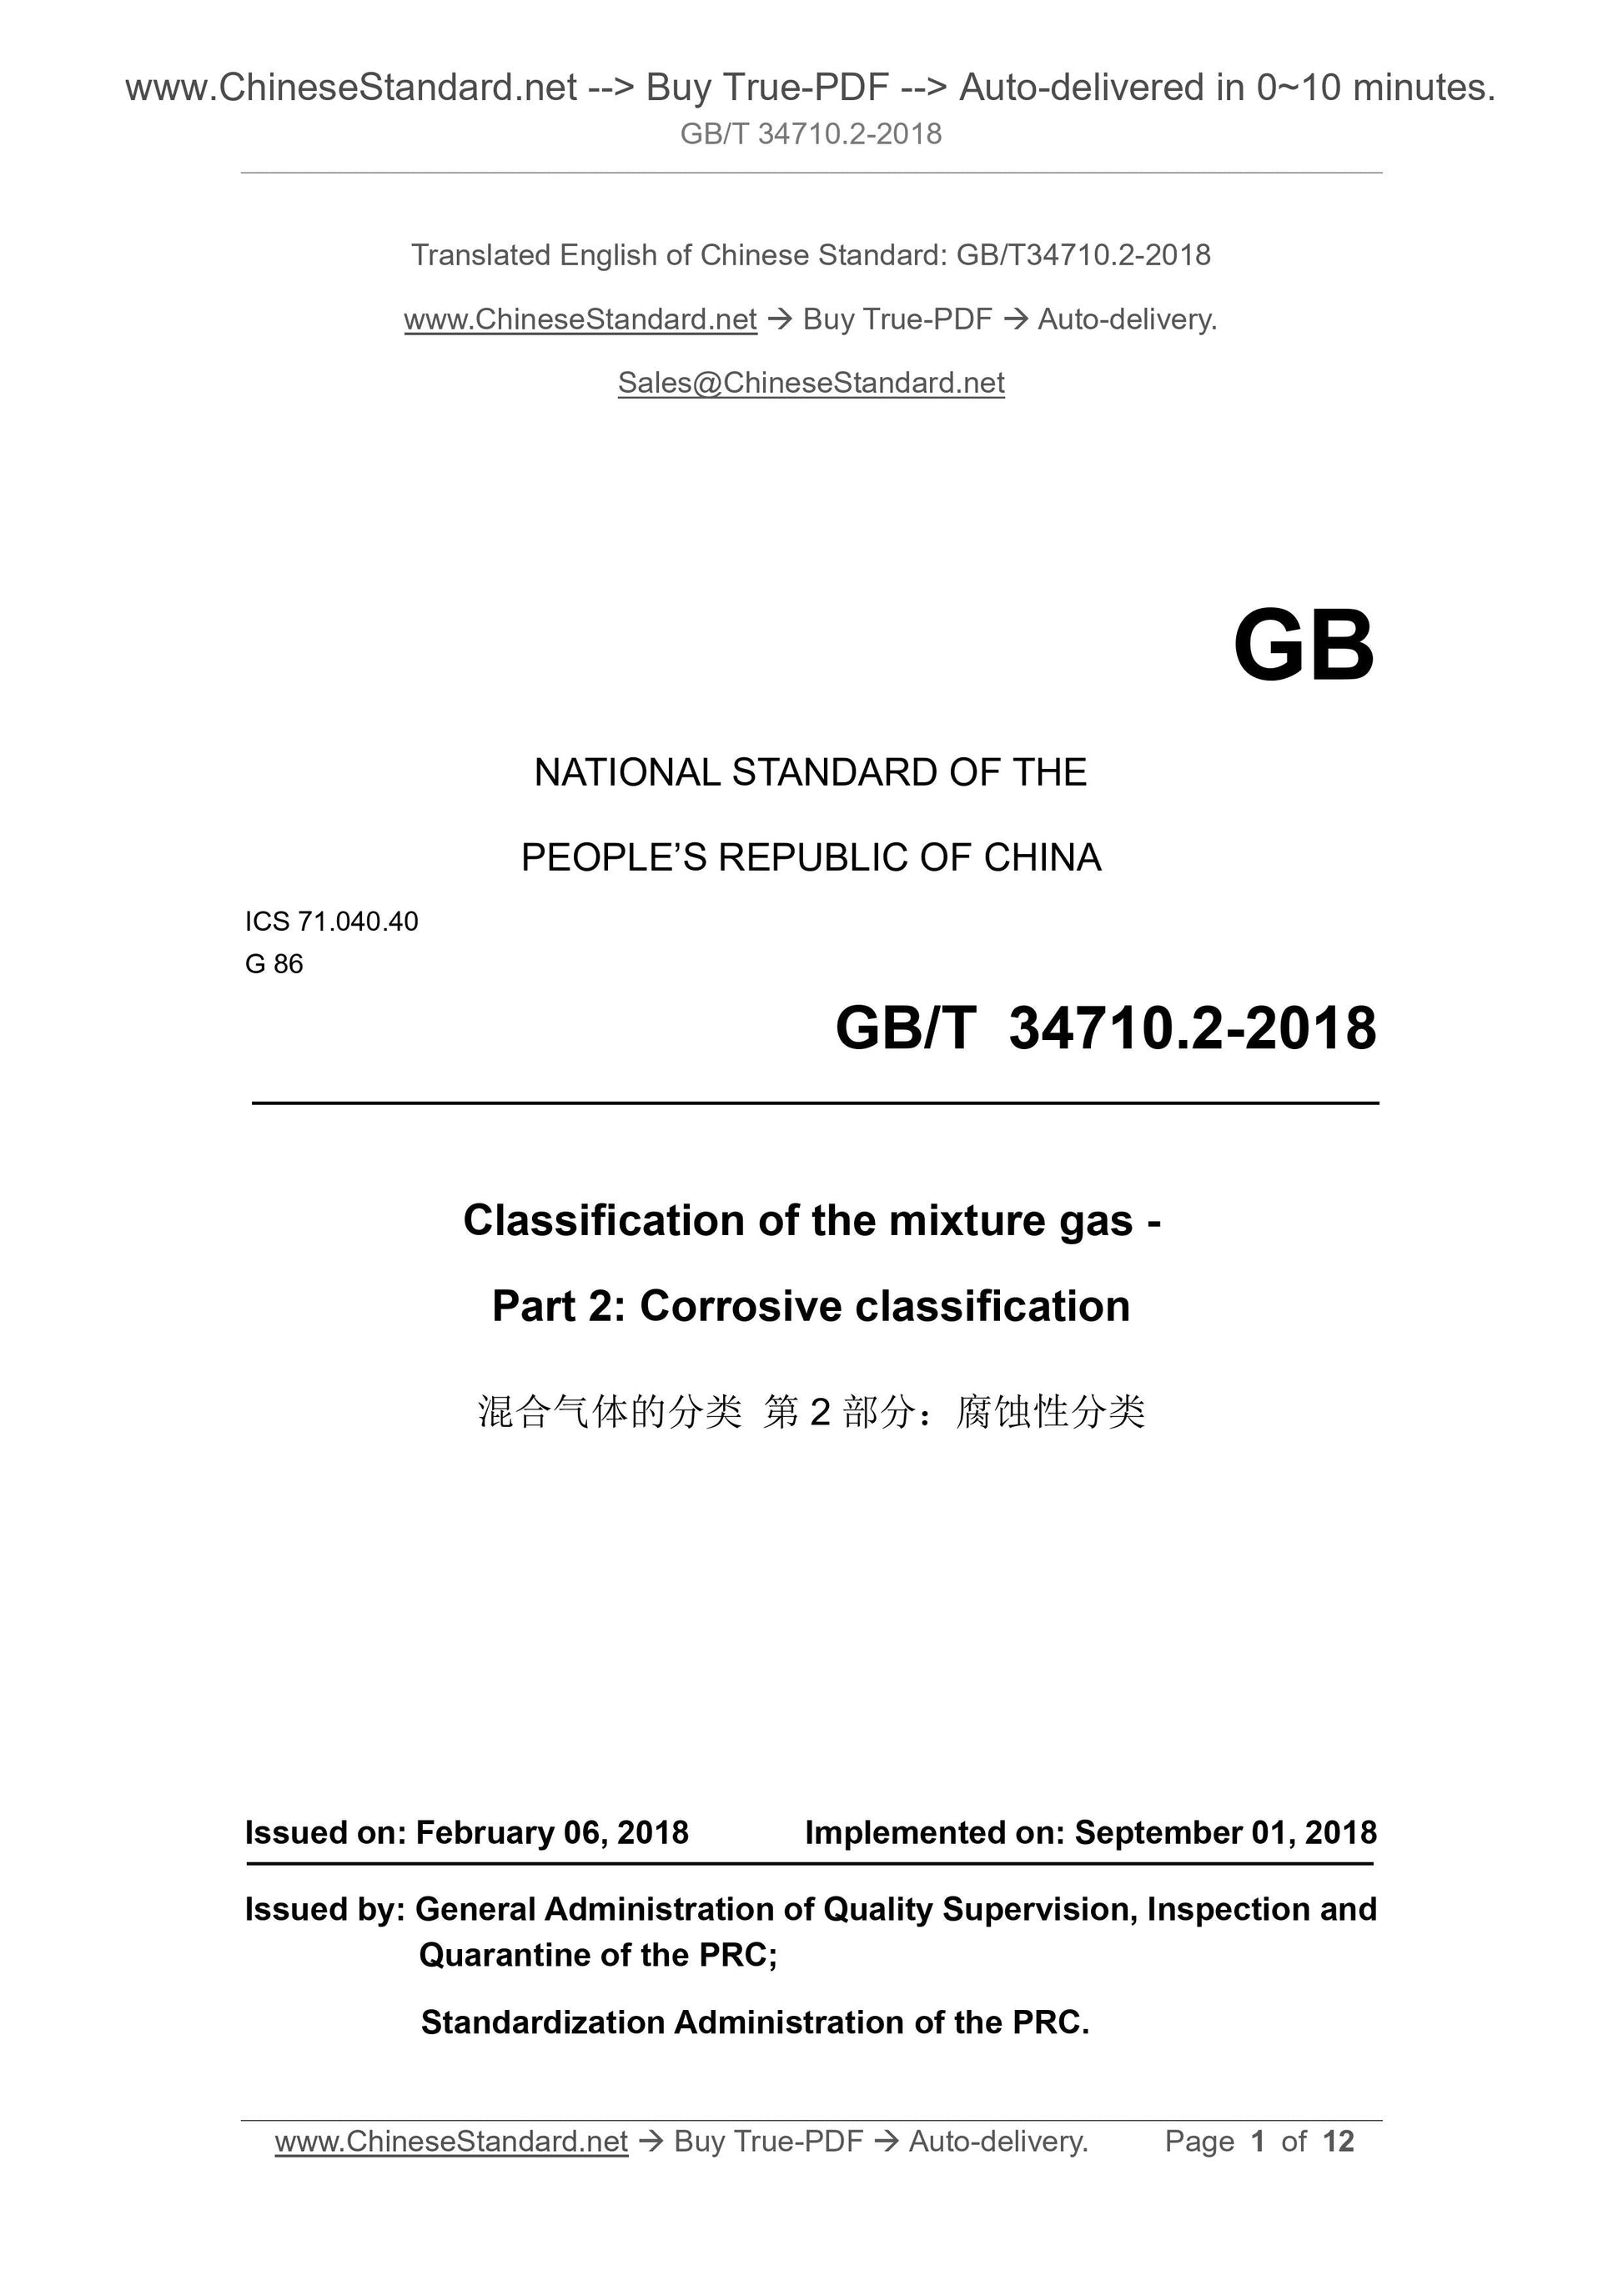 GB/T 34710.2-2018 Page 1